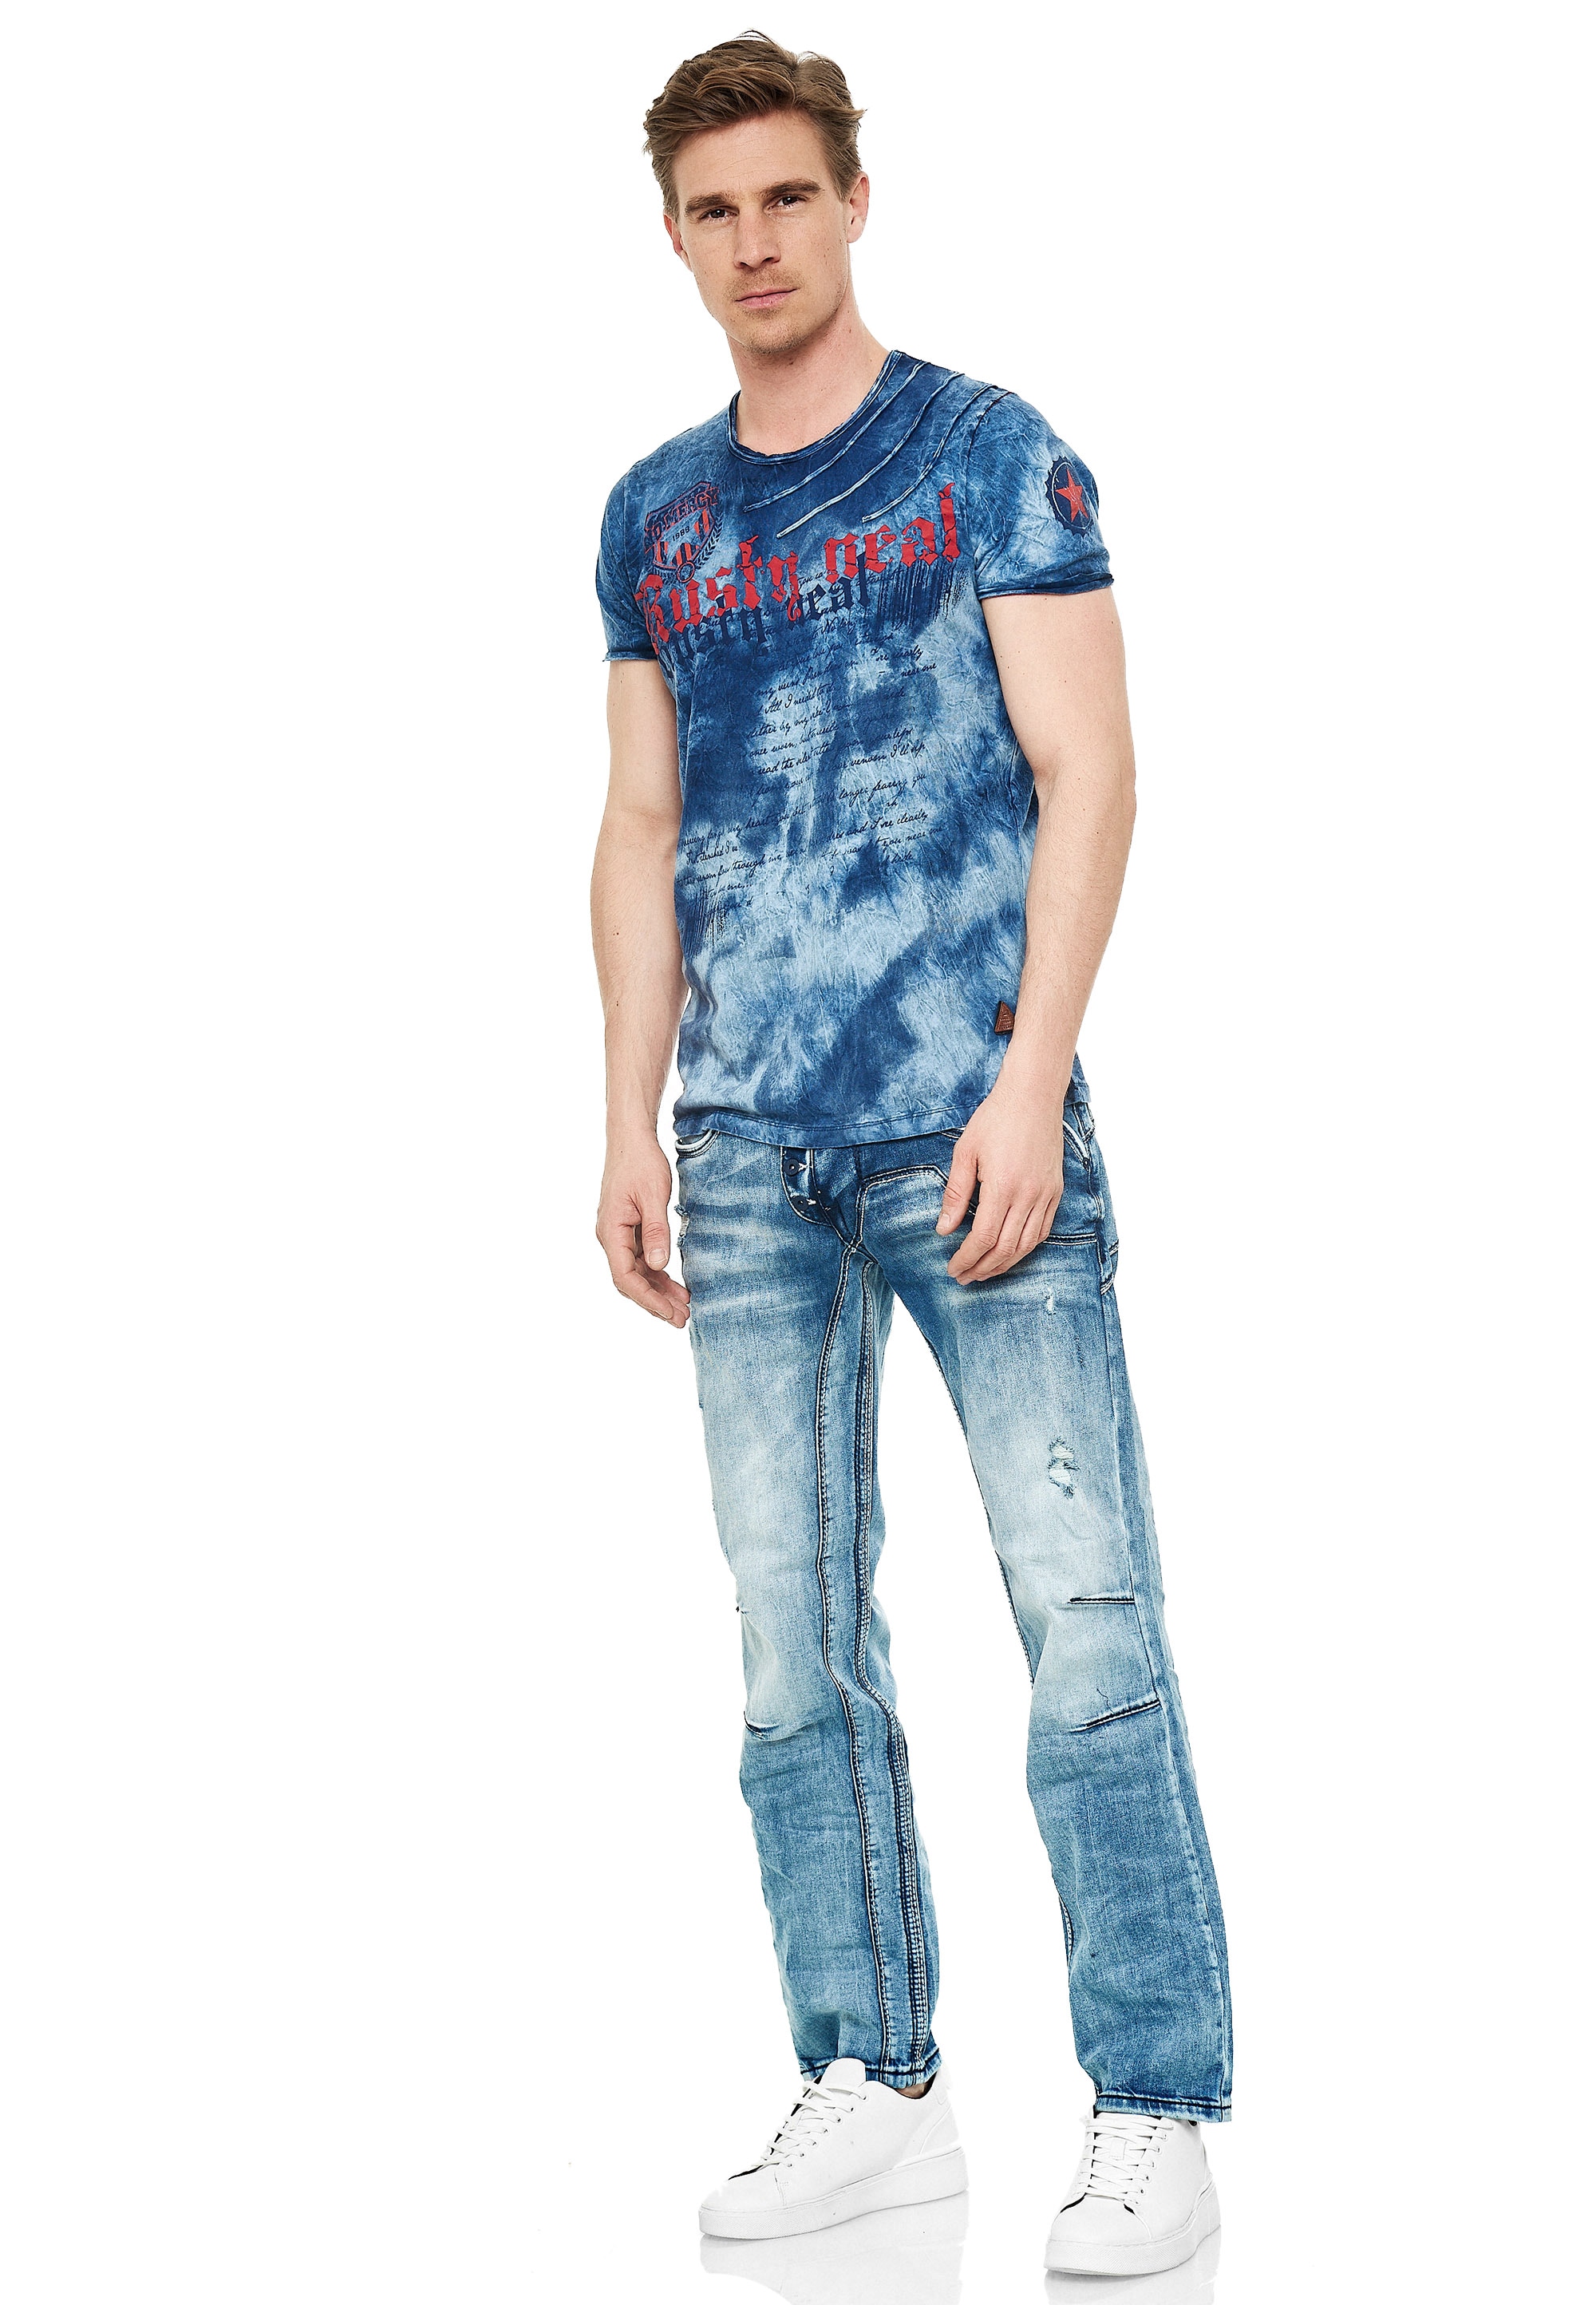 Rusty Neal Bequeme Jeans, mit cooler Waschung